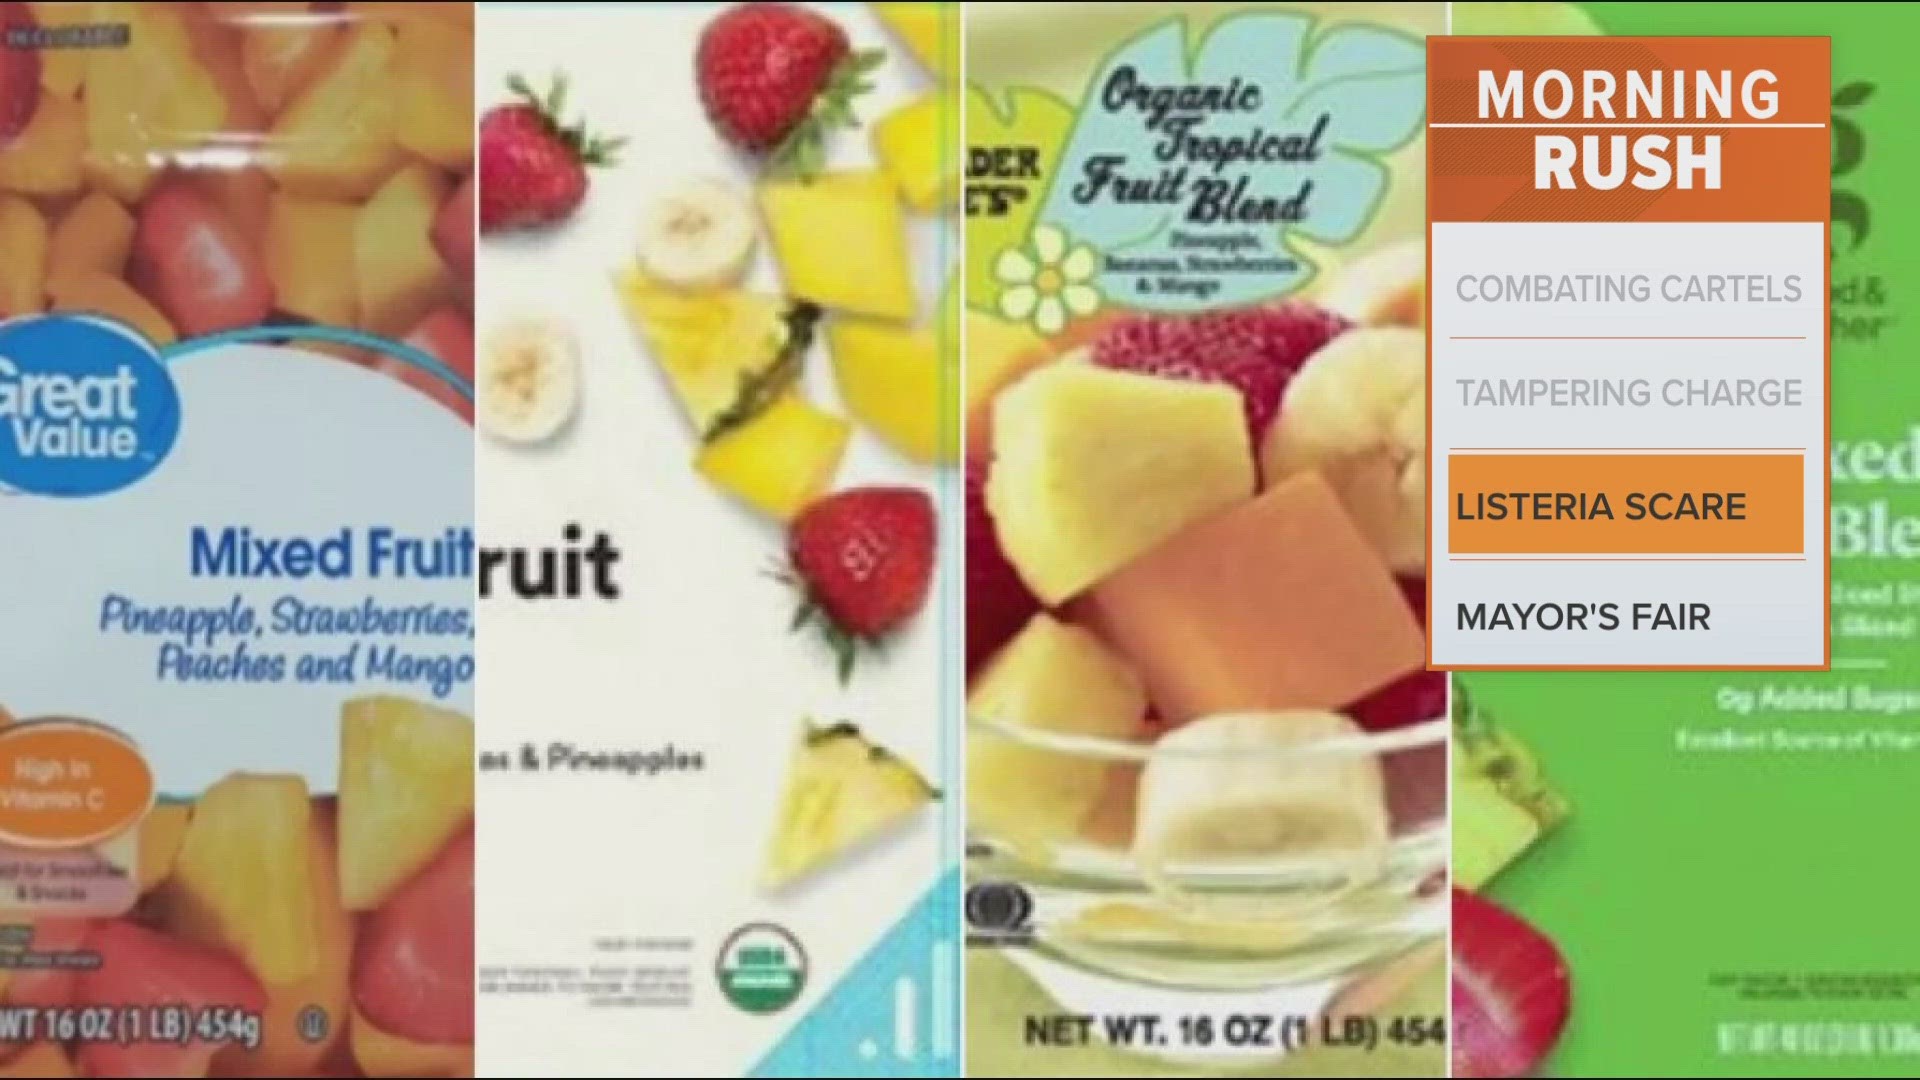 Sunrise Growers has recalled frozen fruit products sold at chain stores nationwide over possible listeria contamination, the US Food and Drug Administration says.